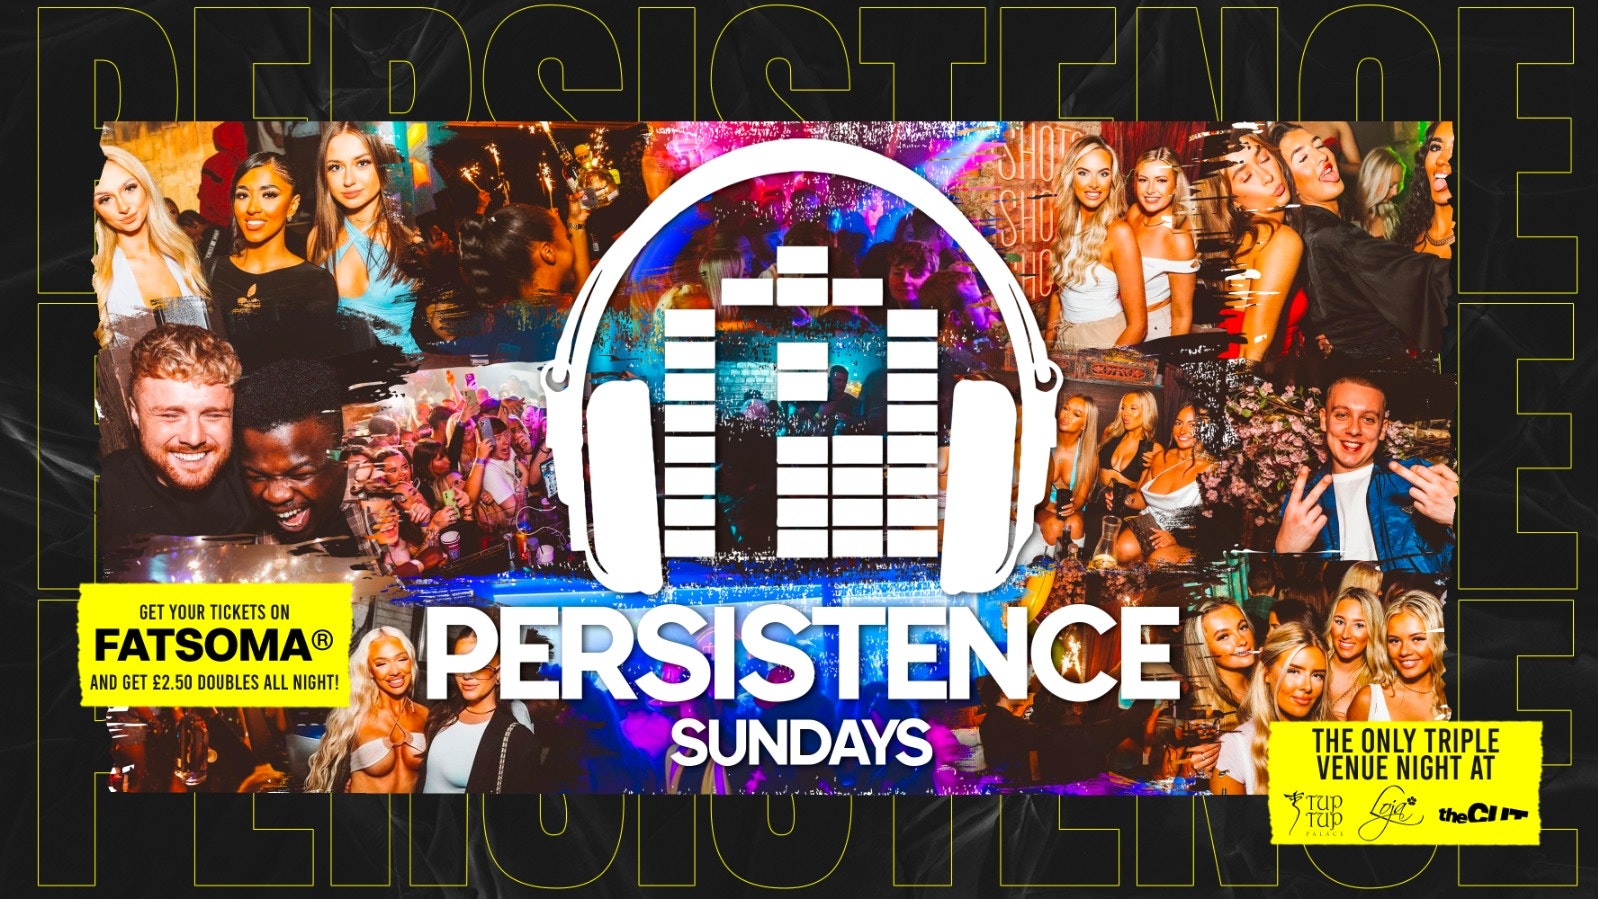 PERSISTENCE | £2.50 DOUBLES WITH A TICKET! | TUP TUP PALACE, LOJA & THE CUT | 26th MARCH